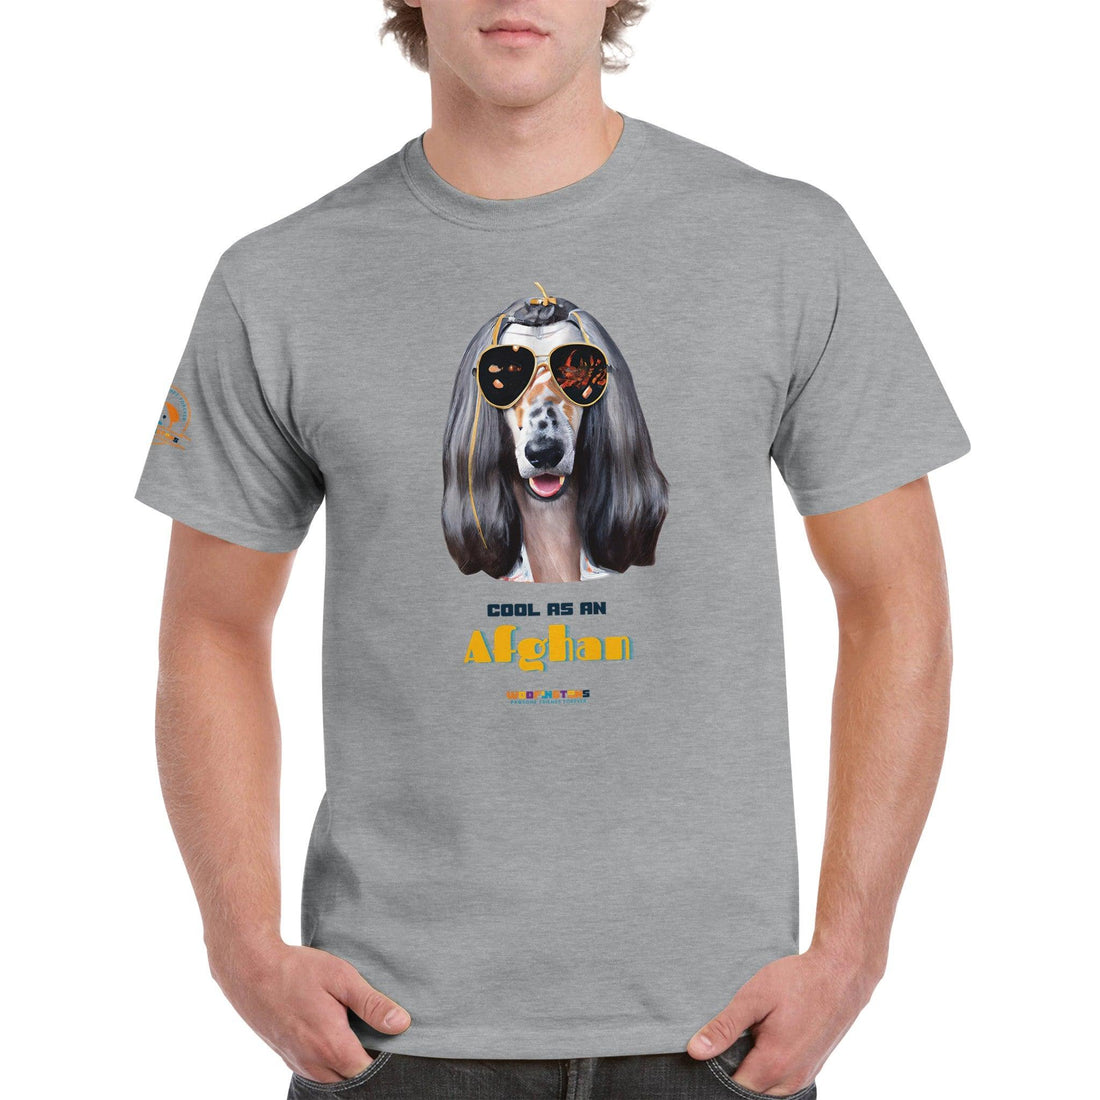 &quot;Cool as an Afghan” - Cool Dog T-Shirt - Woofingtons